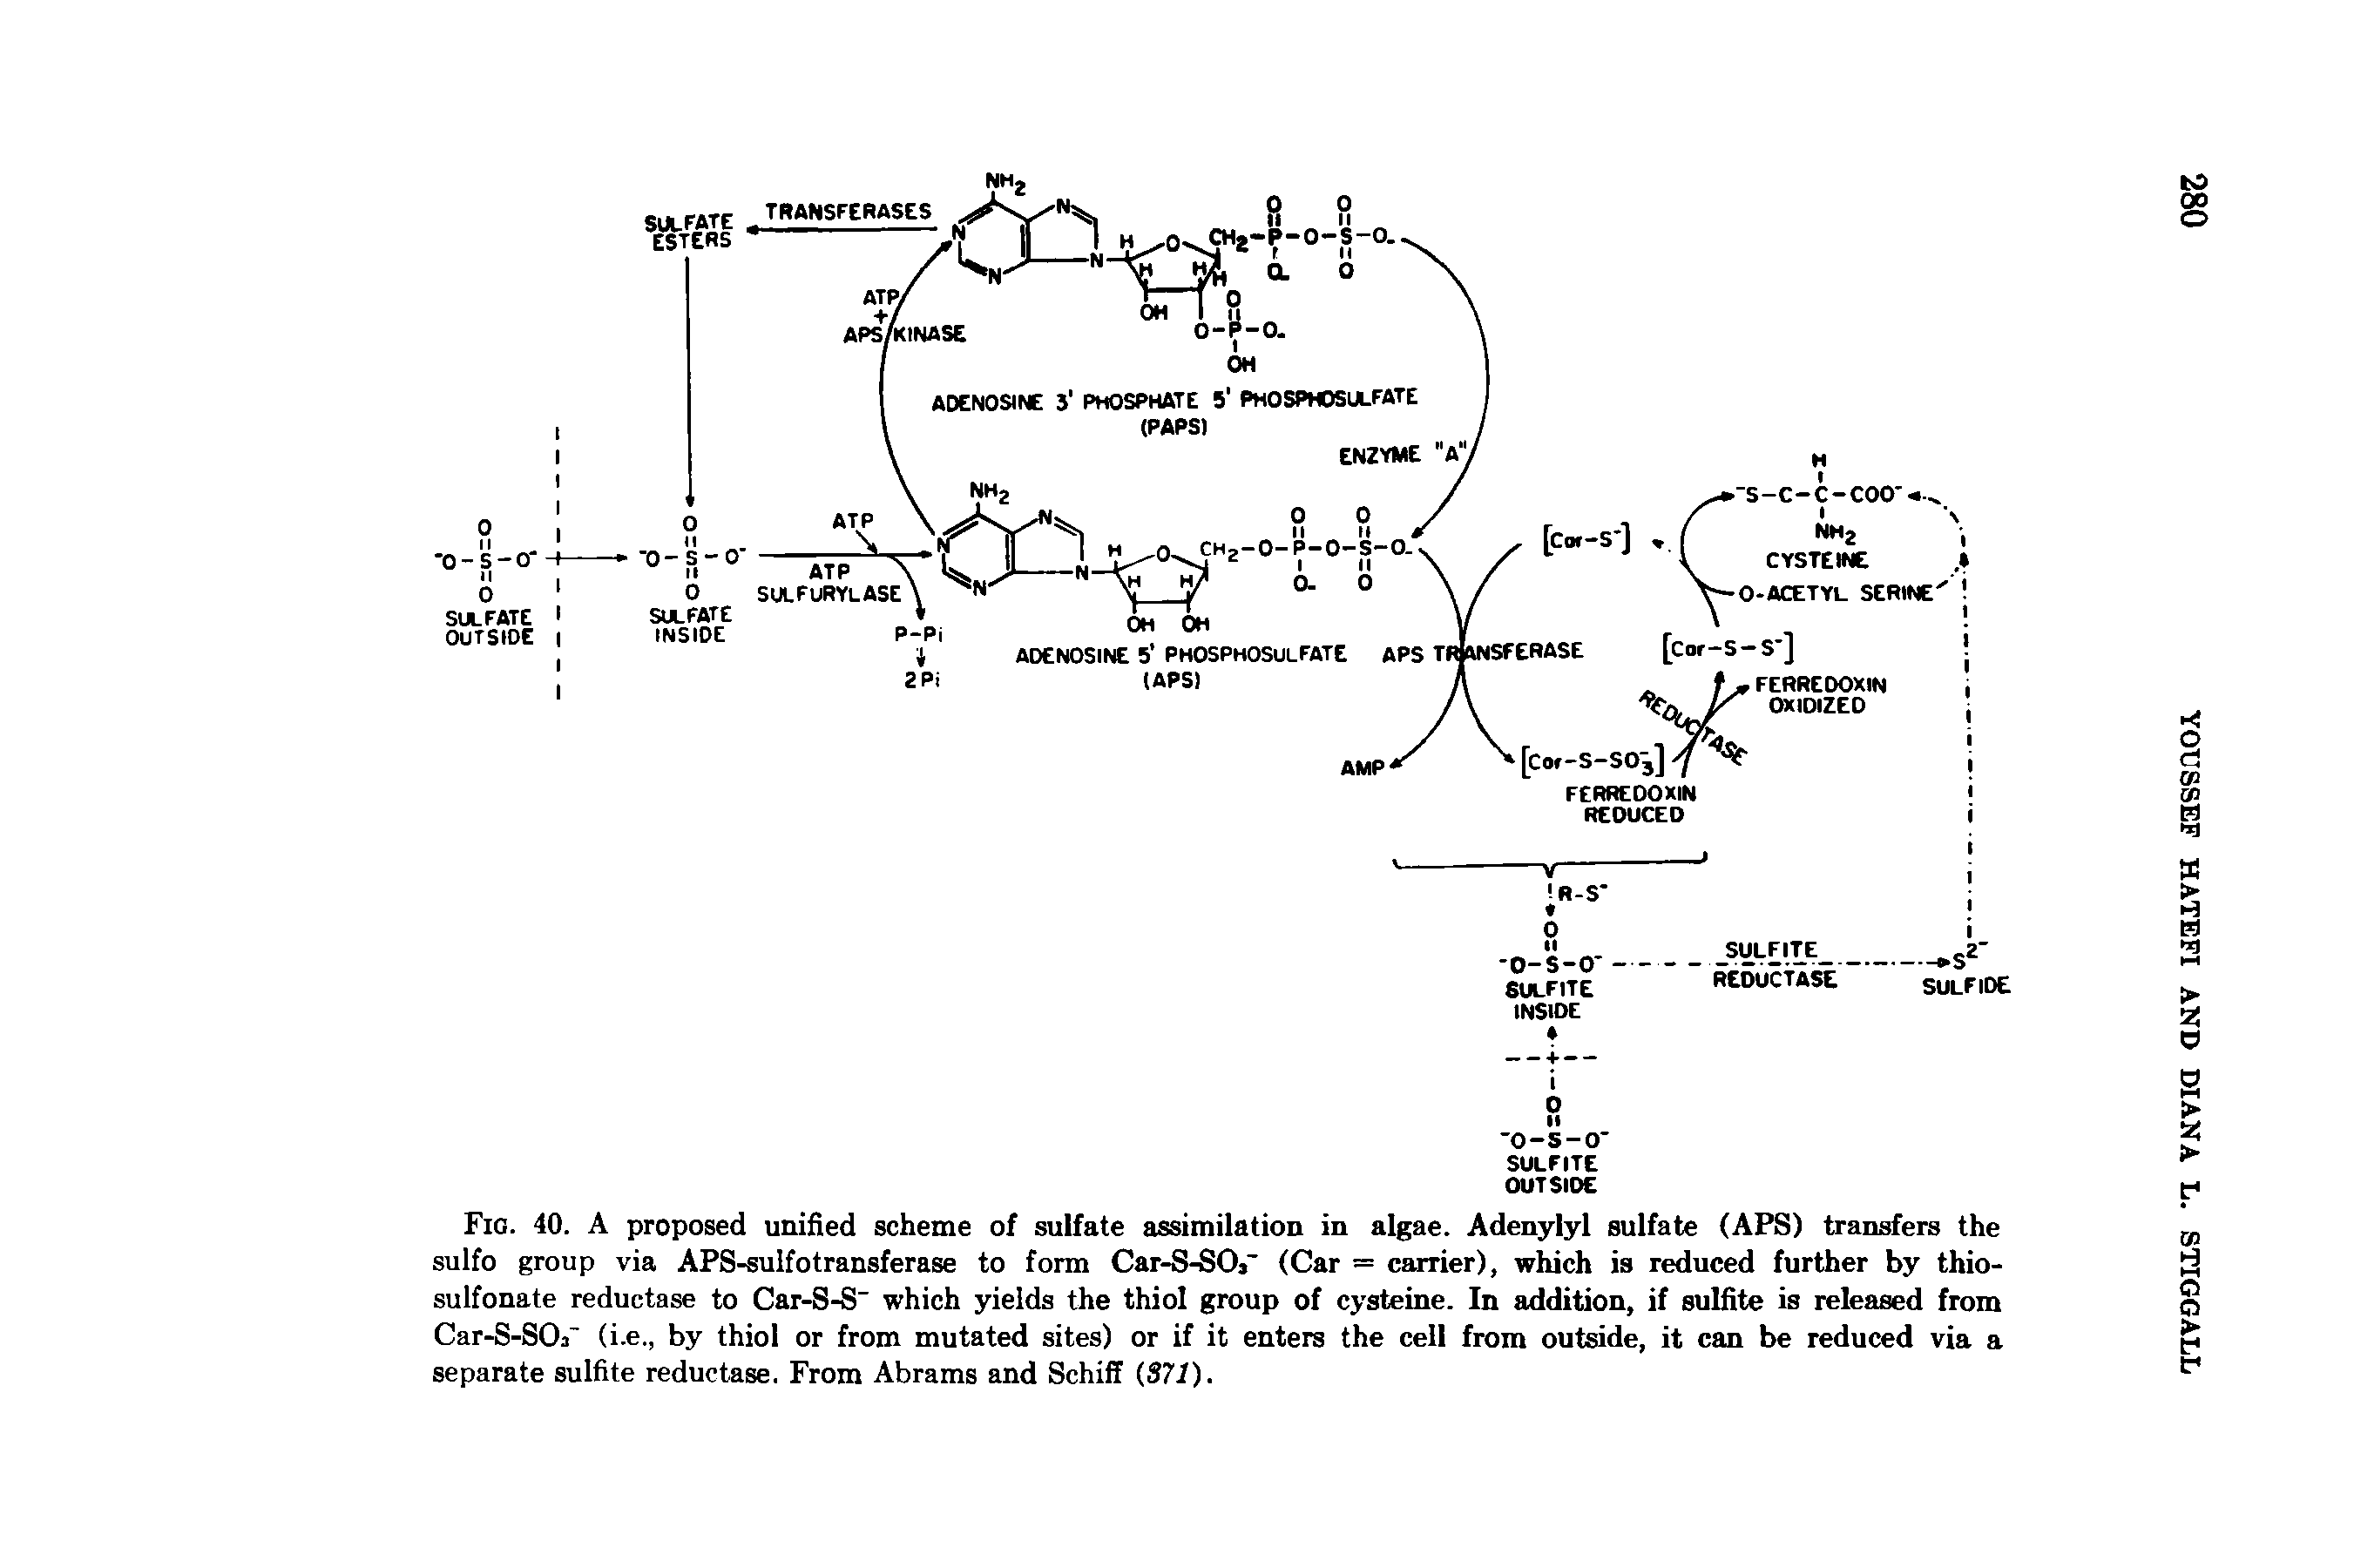 Fig. 40. A proposed unified scheme of sulfate assimilation in algae. Adenylyl sulfate (APS) transfers the sulfo group via APS-sulfotransferase to form Car-S-SOr (Car = carrier), which is reduced further by thio-sulfonate reductase to Car-S-S which yields the thiol group of cysteine. In addition, if sulfite is released from Car-S-SOa (i.e., by thiol or from mutated sites) or if it enters the cell from outside, it can be reduced via a separate sulhte reductase. From Abrams and Schiff (57i).